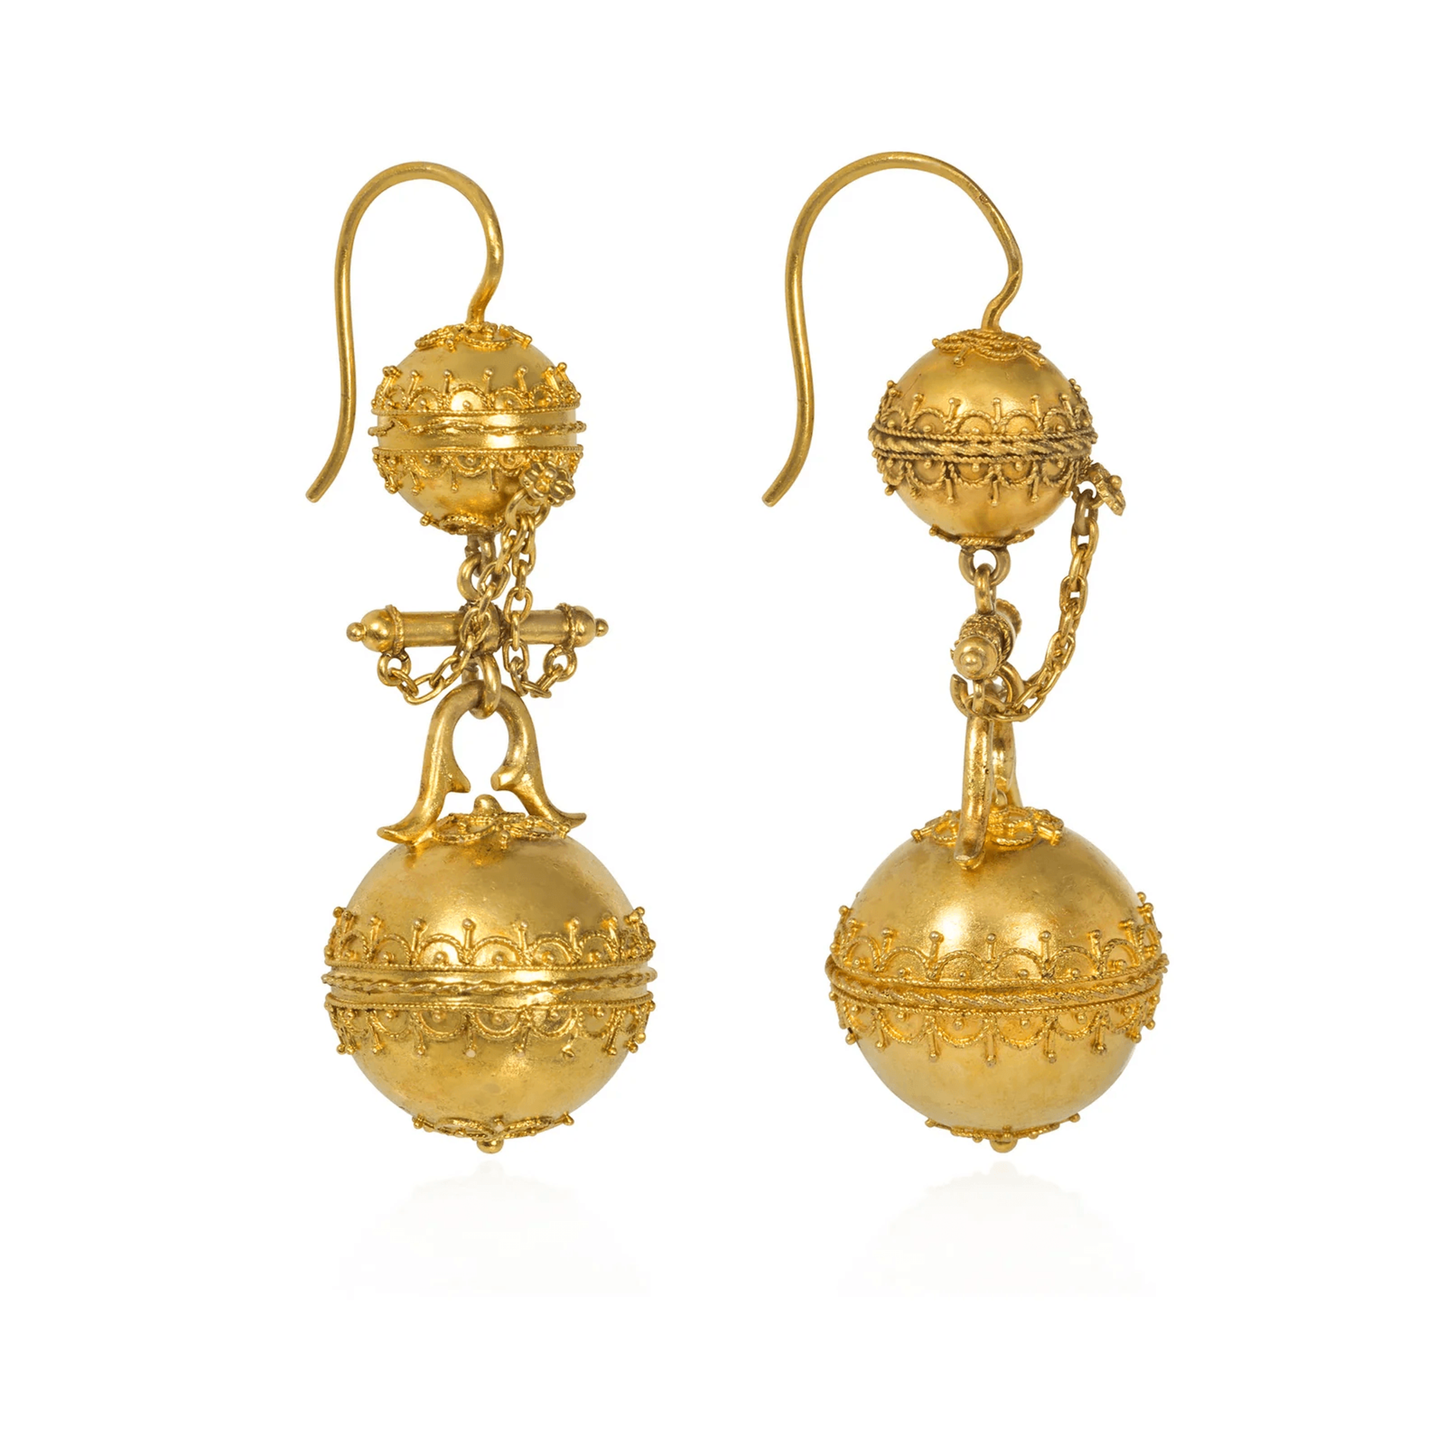 Victorian Etruscan Revival 14KT Yellow Gold Earrings side